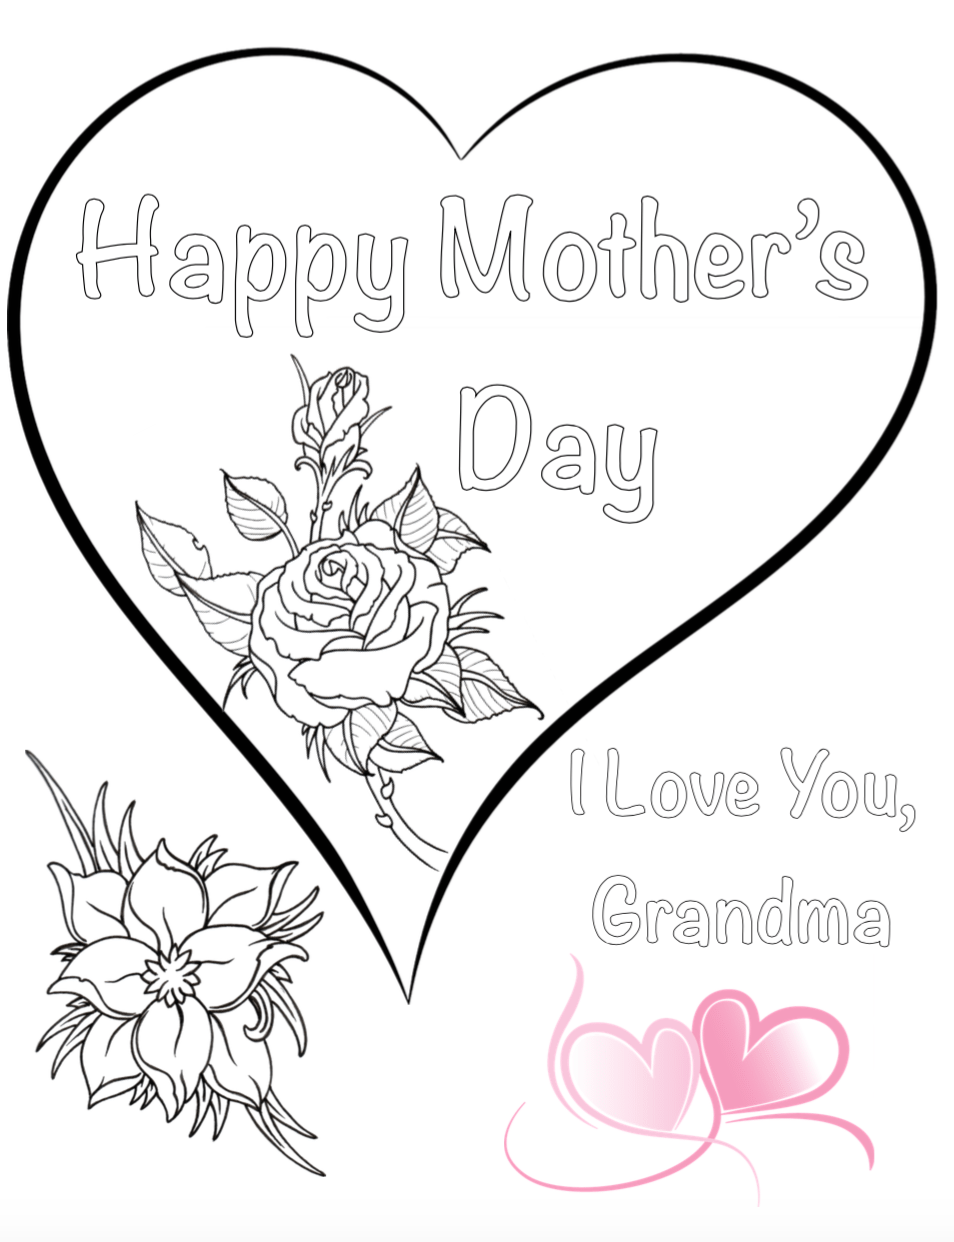 Free Printable Mother's Day Coloring Pages 4 different designs